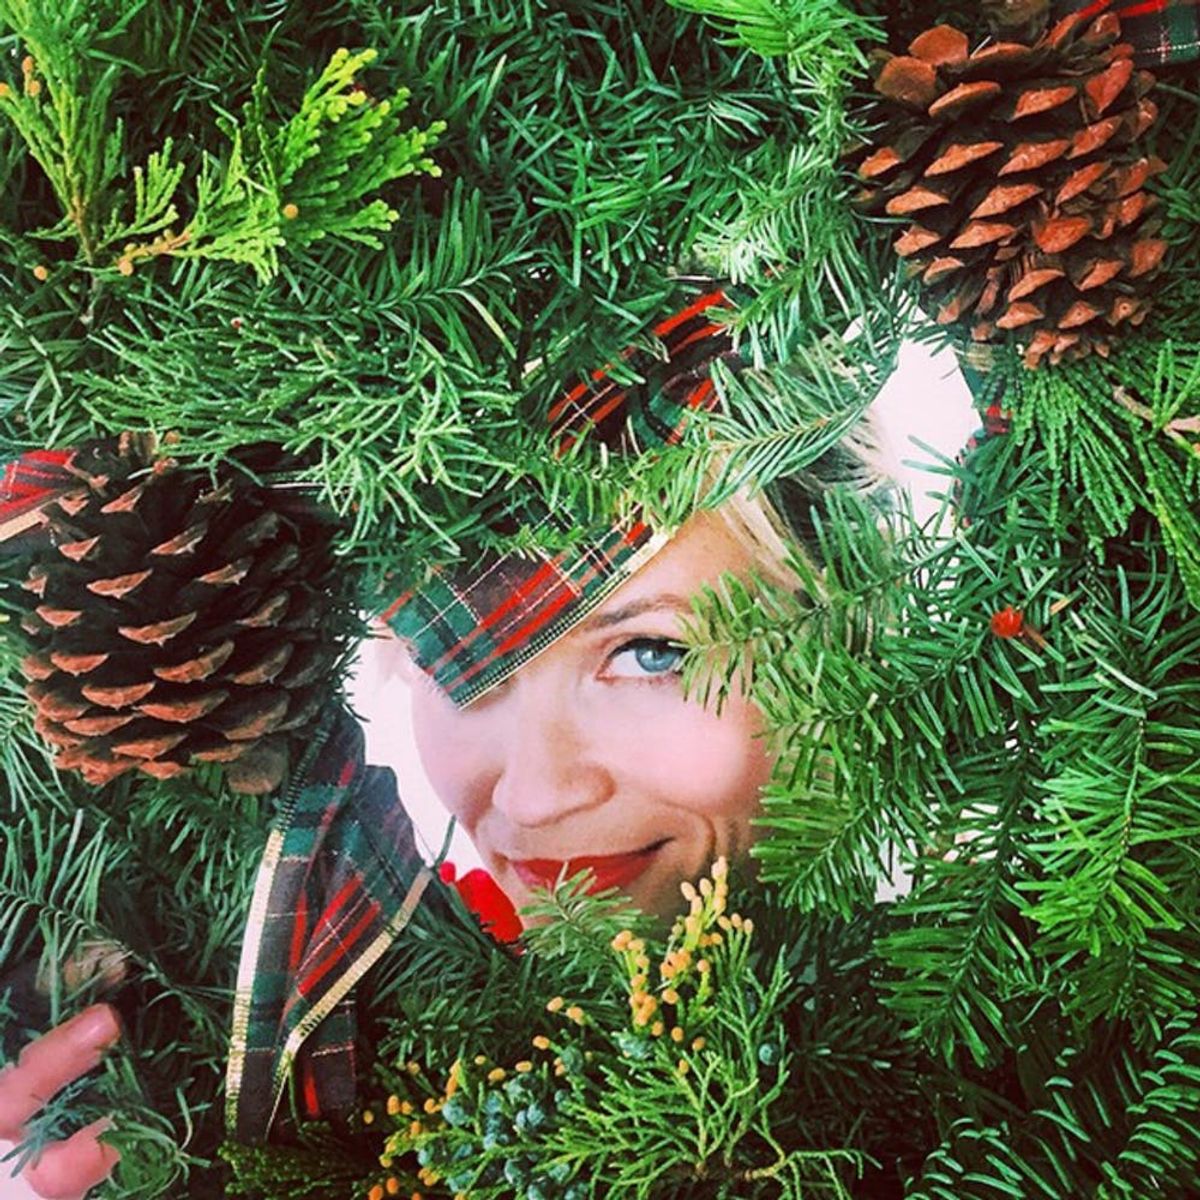 44 Celebs You Wish You Spent Christmas With